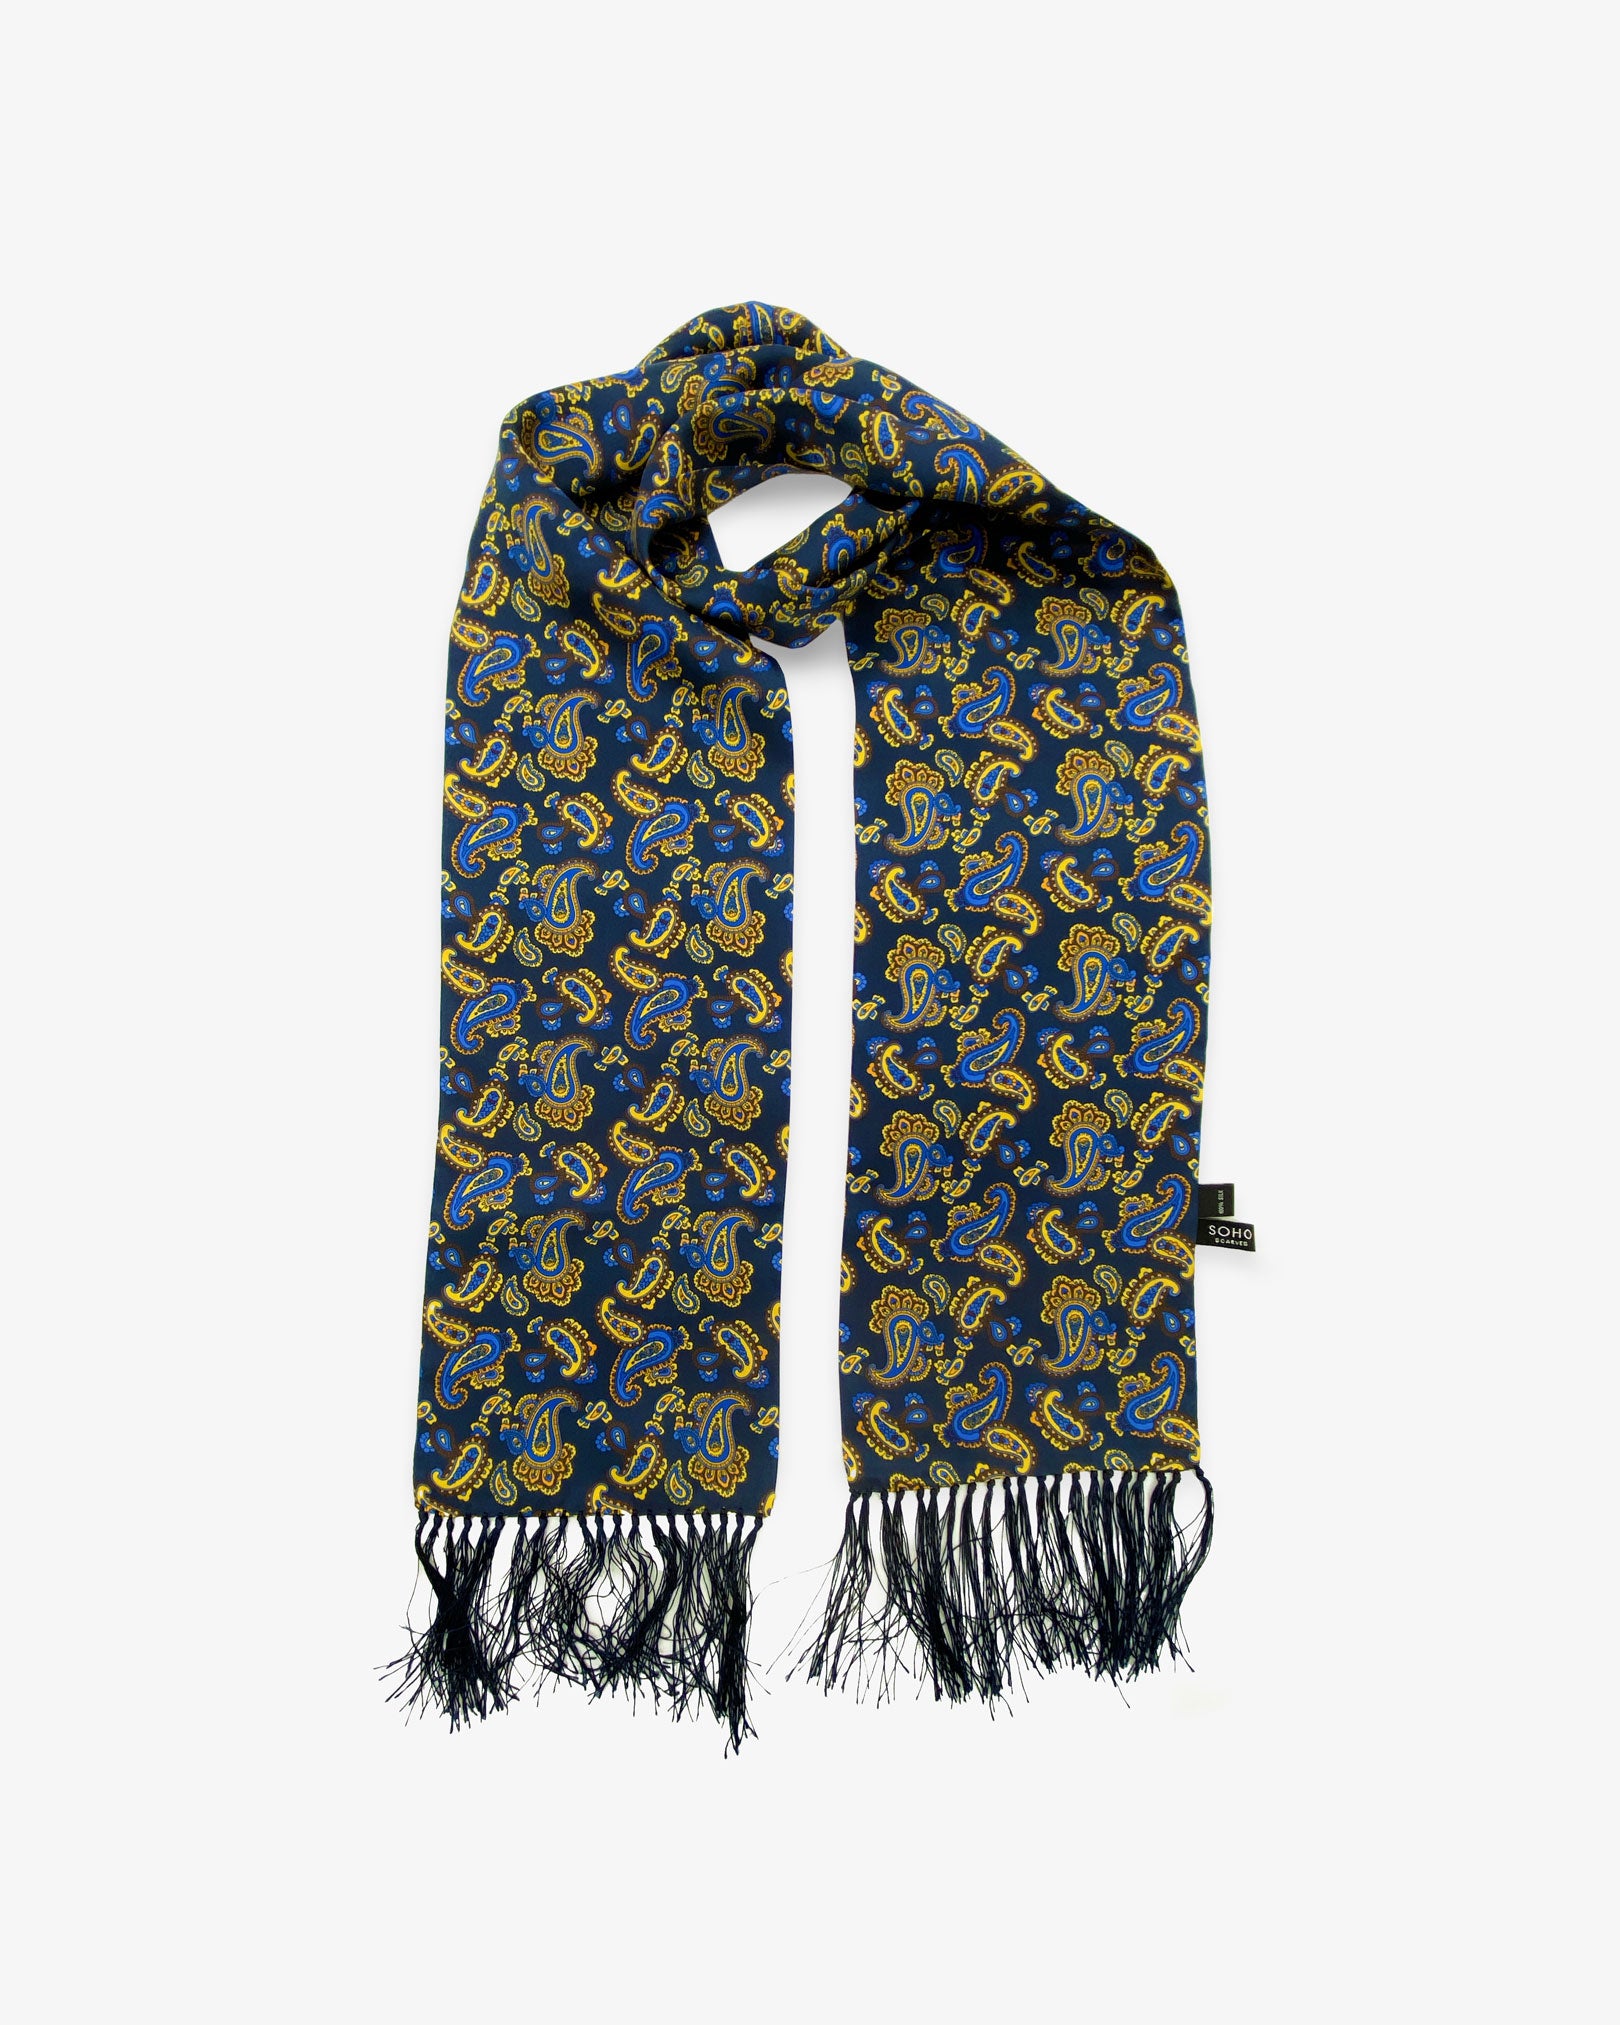 The Lucie pure silk aviator paisley scarf looped in middle with both ends parallel showing the intricate swirls of blue and yellow paisley on a deep blue ground with matching 3-inch fringe.